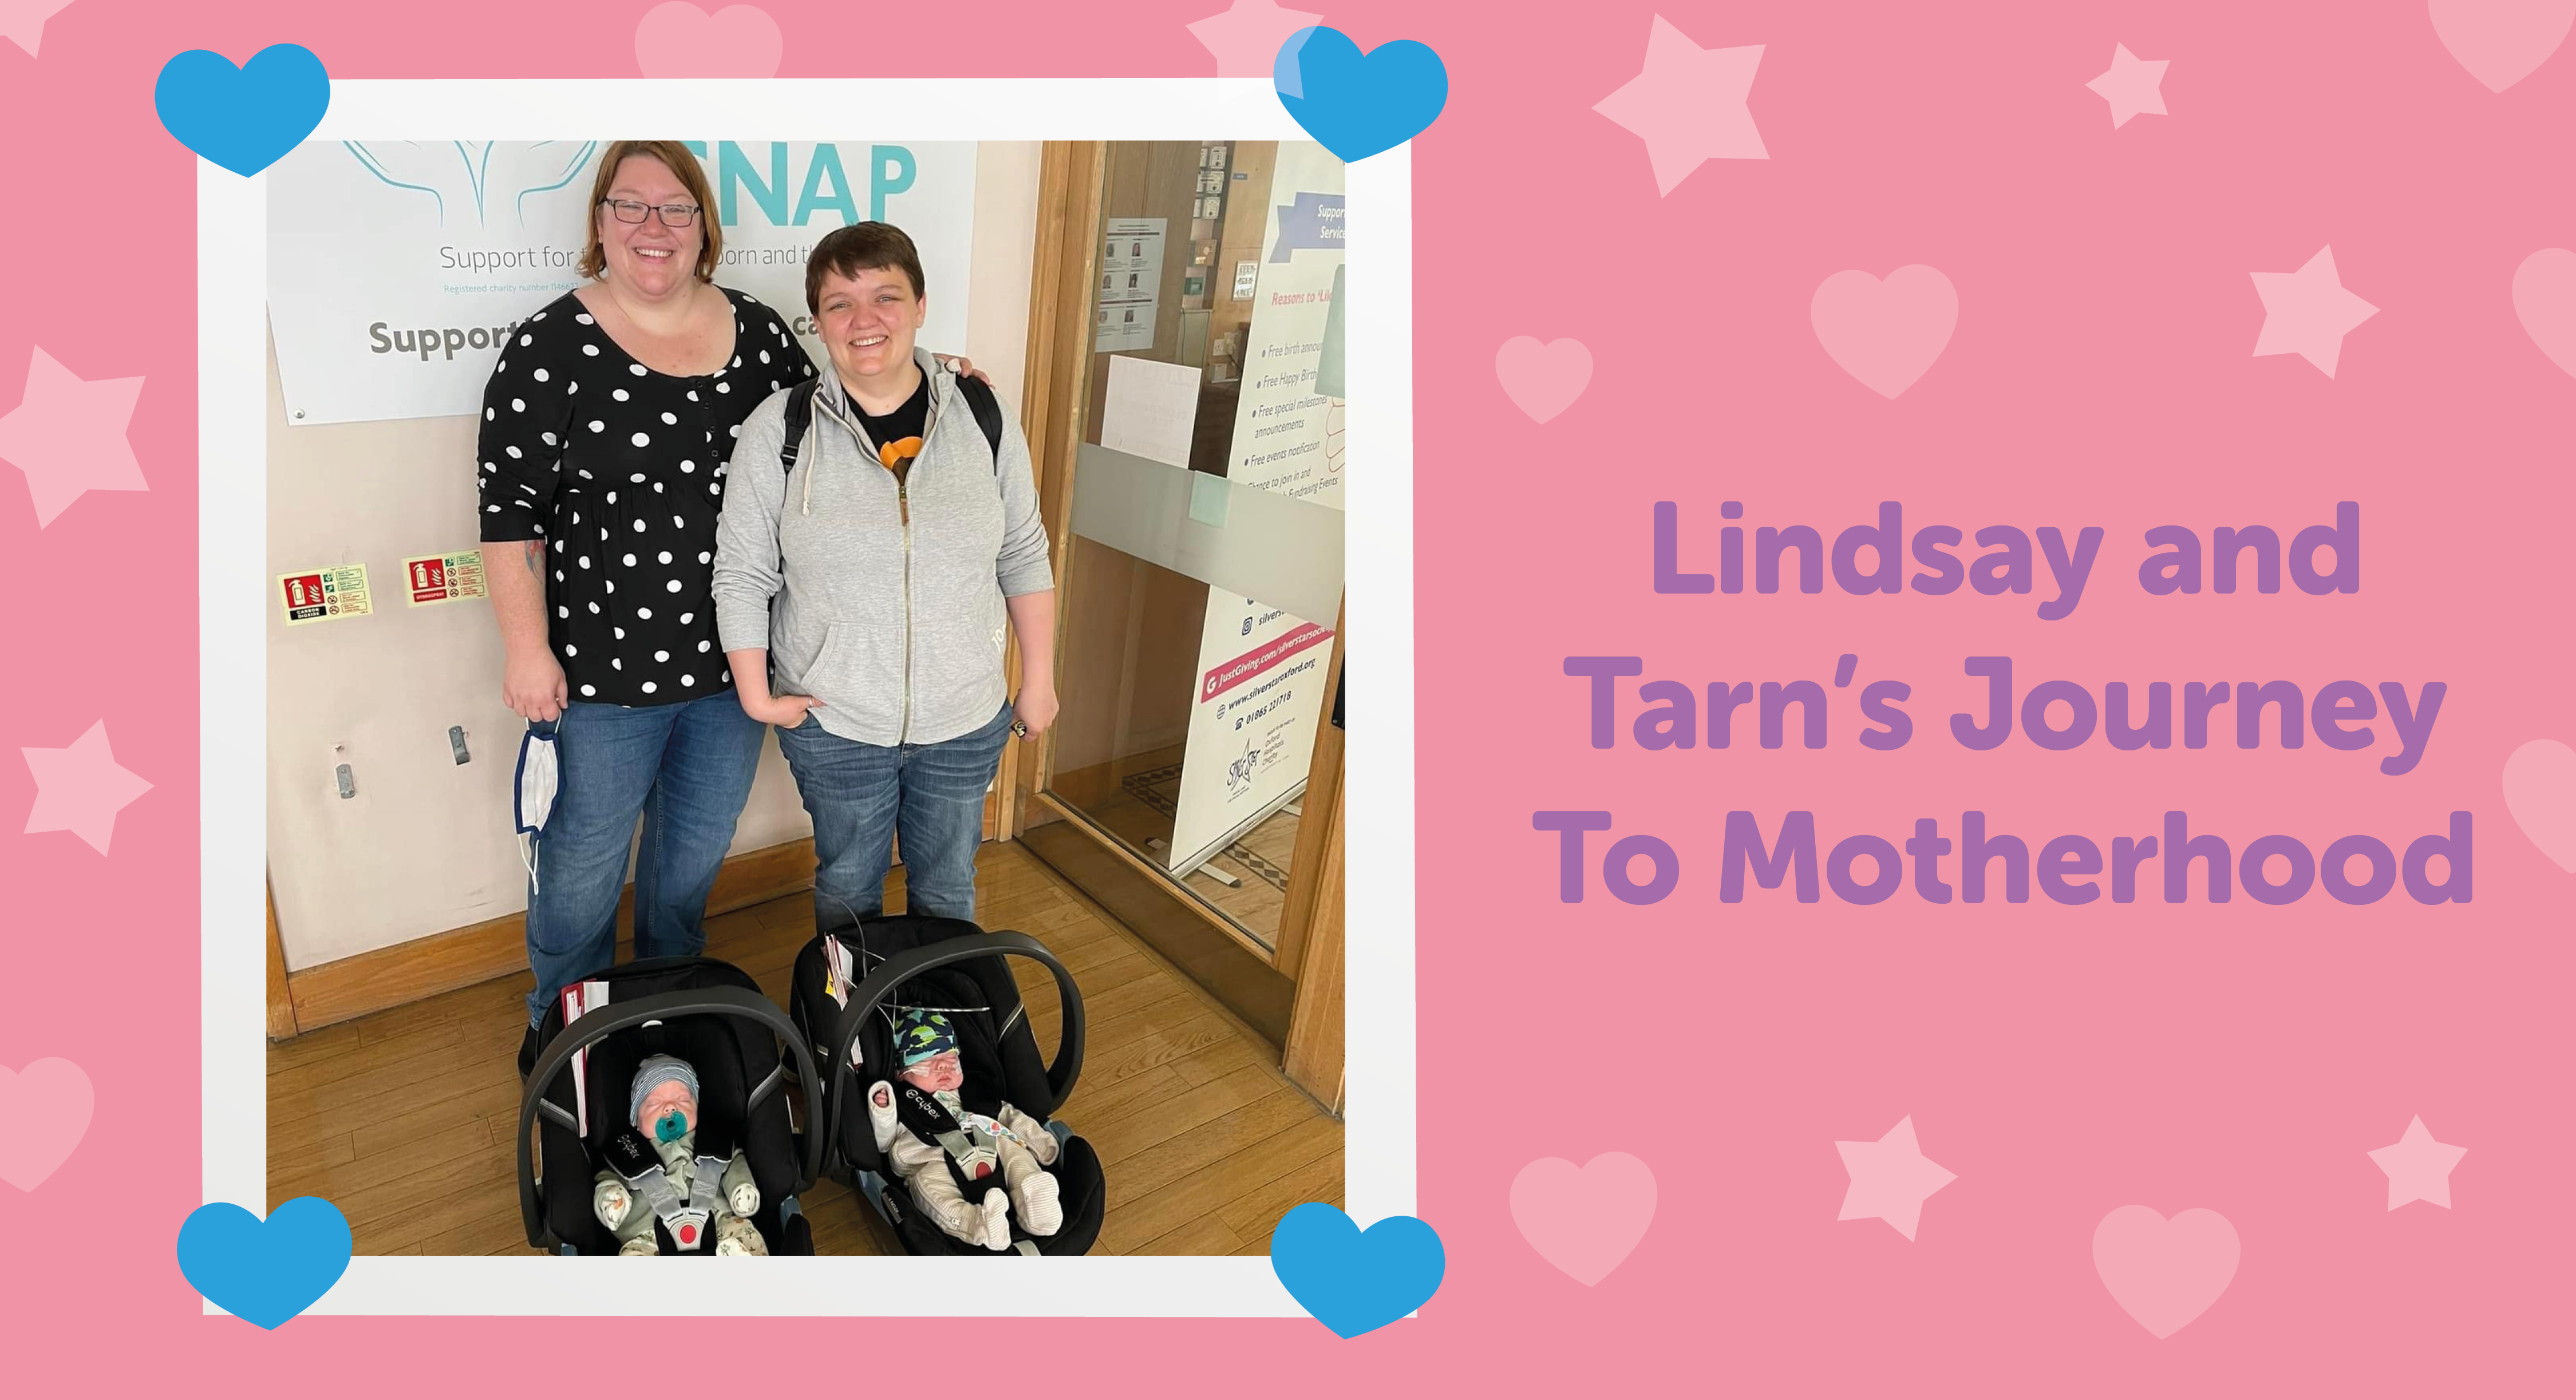 Twin Mum, Lindsay, shares her and her wife, Tarn’s, moving journey to motherhood